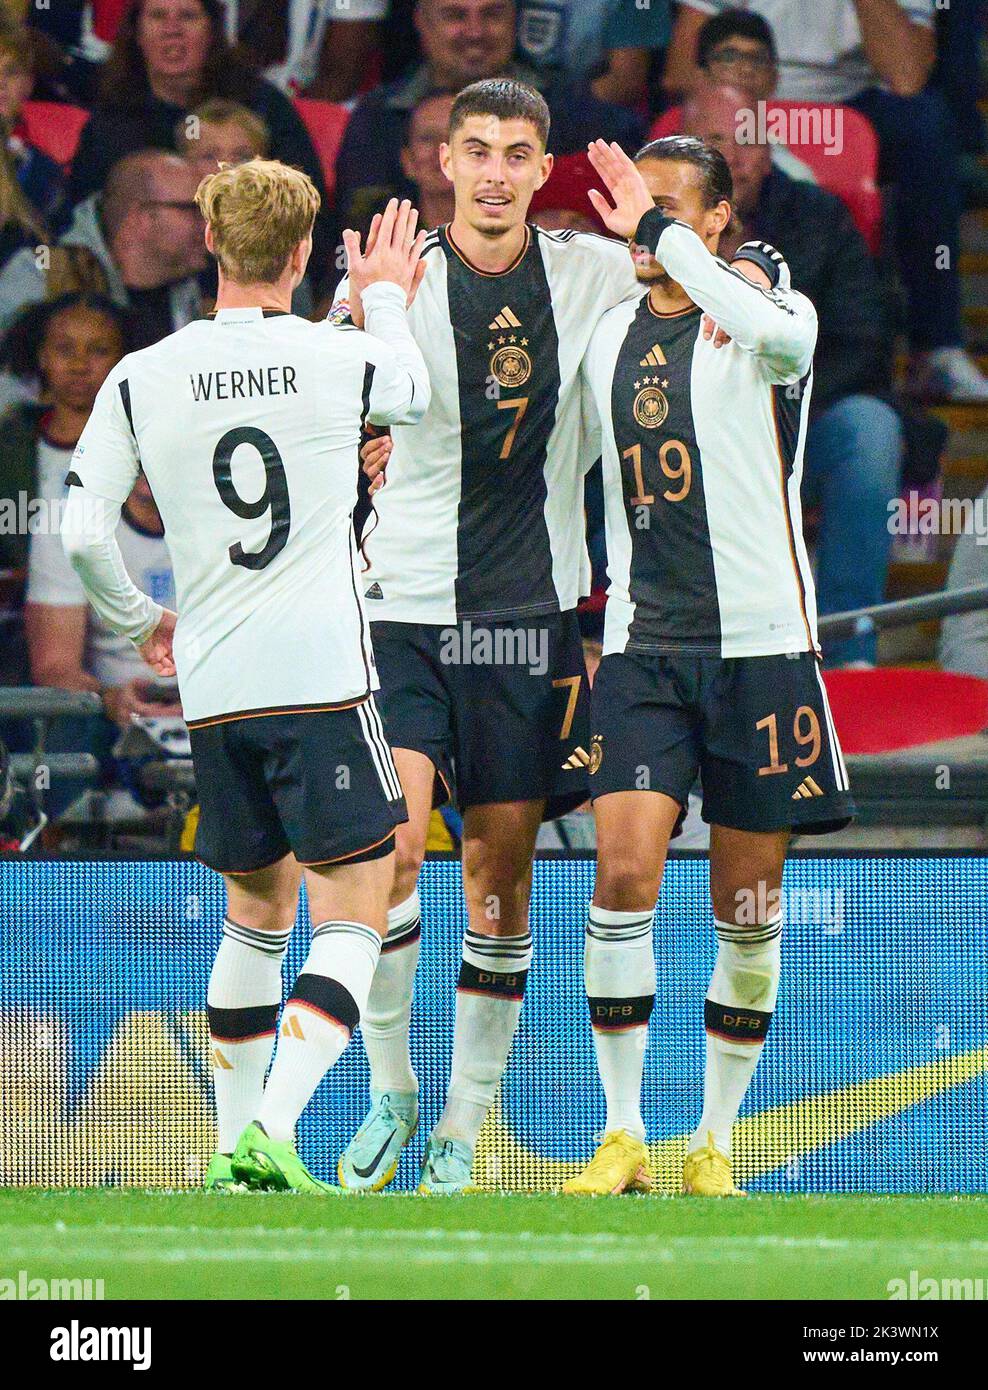 Kai Havertz, DFB 7 celebrates his goal, happy, laugh, celebration, 0-2 with Timo Werner, DFB 9 Leroy SANE, DFB 19  in the UEFA Nations League 2022 match  ENGLAND - GERMANY 3-3  in Season 2022/2023 on Sept 26, 2022  in London, Great Britain.  © Peter Schatz / Alamy Live News Stock Photo